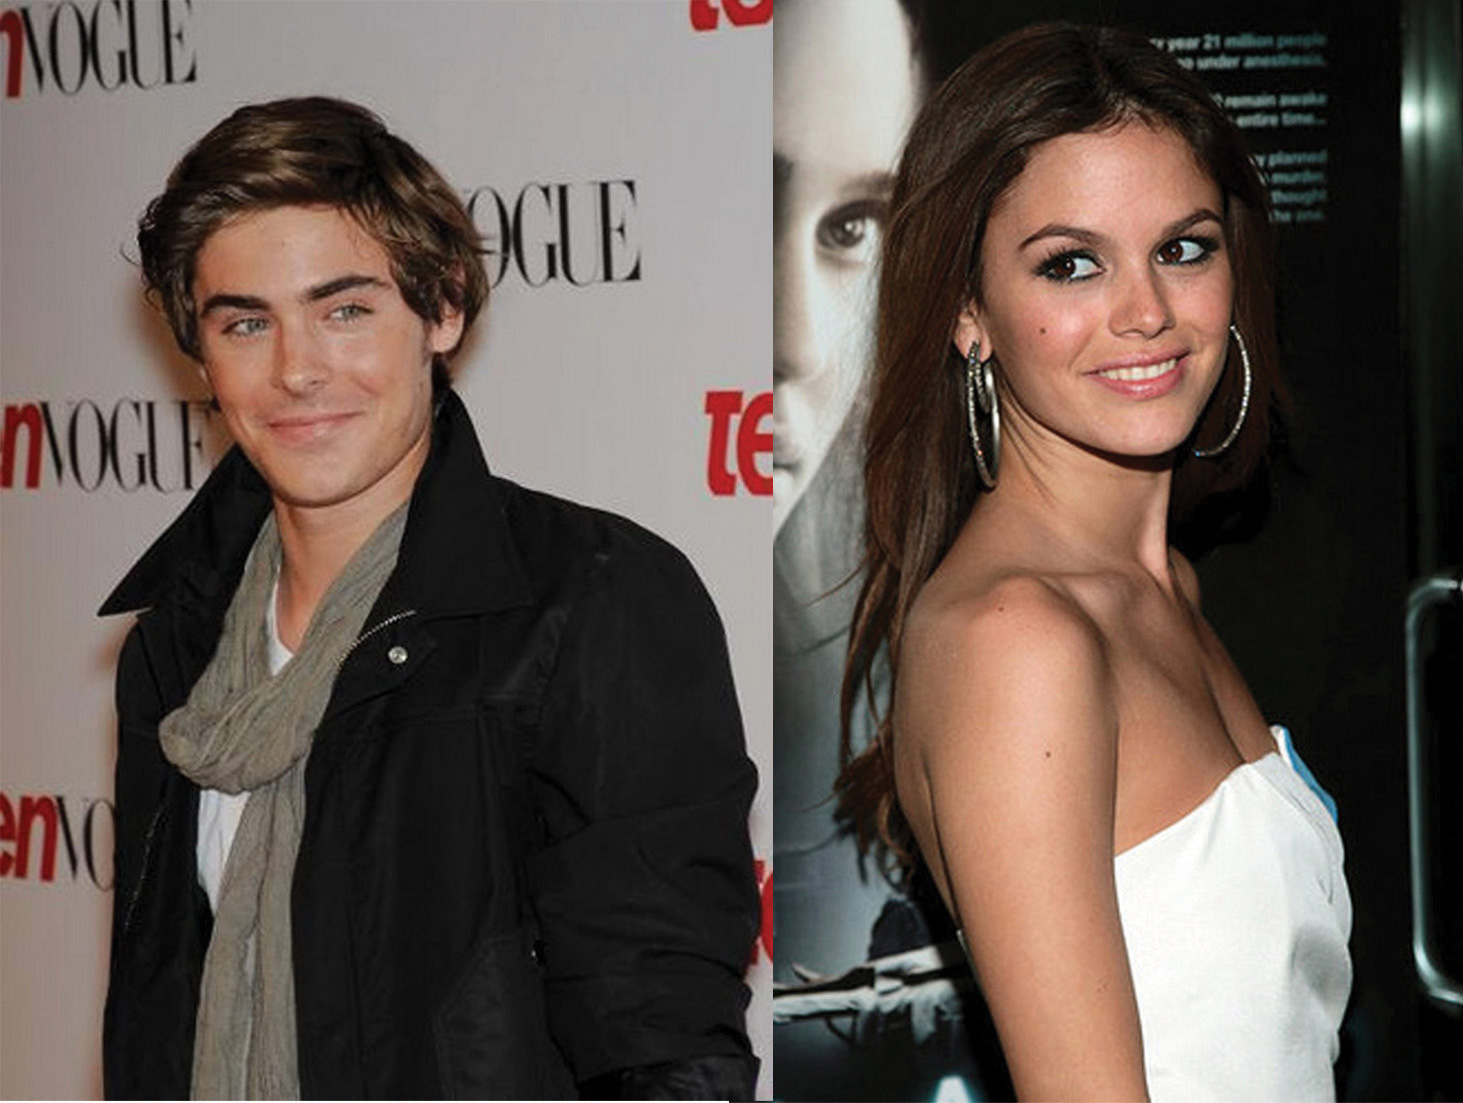 On the left, this picture shows male celebrity Zac Effron; on the right, this picture shows female celebrity Victoria Justice.